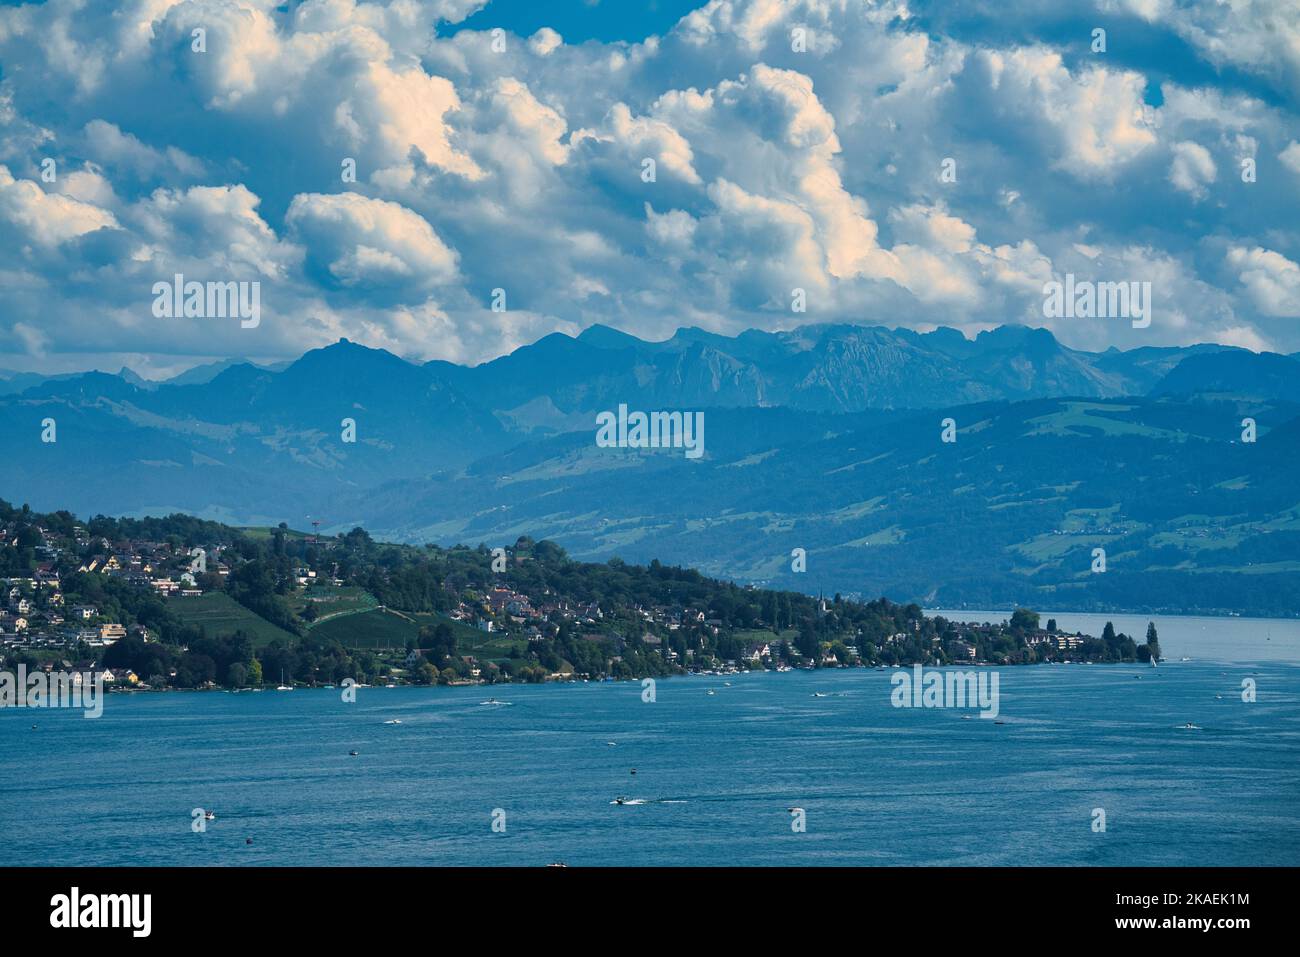 A beautiful view of Lake Zurich with mountains in the background in Meilen, Switzerland Stock Photo